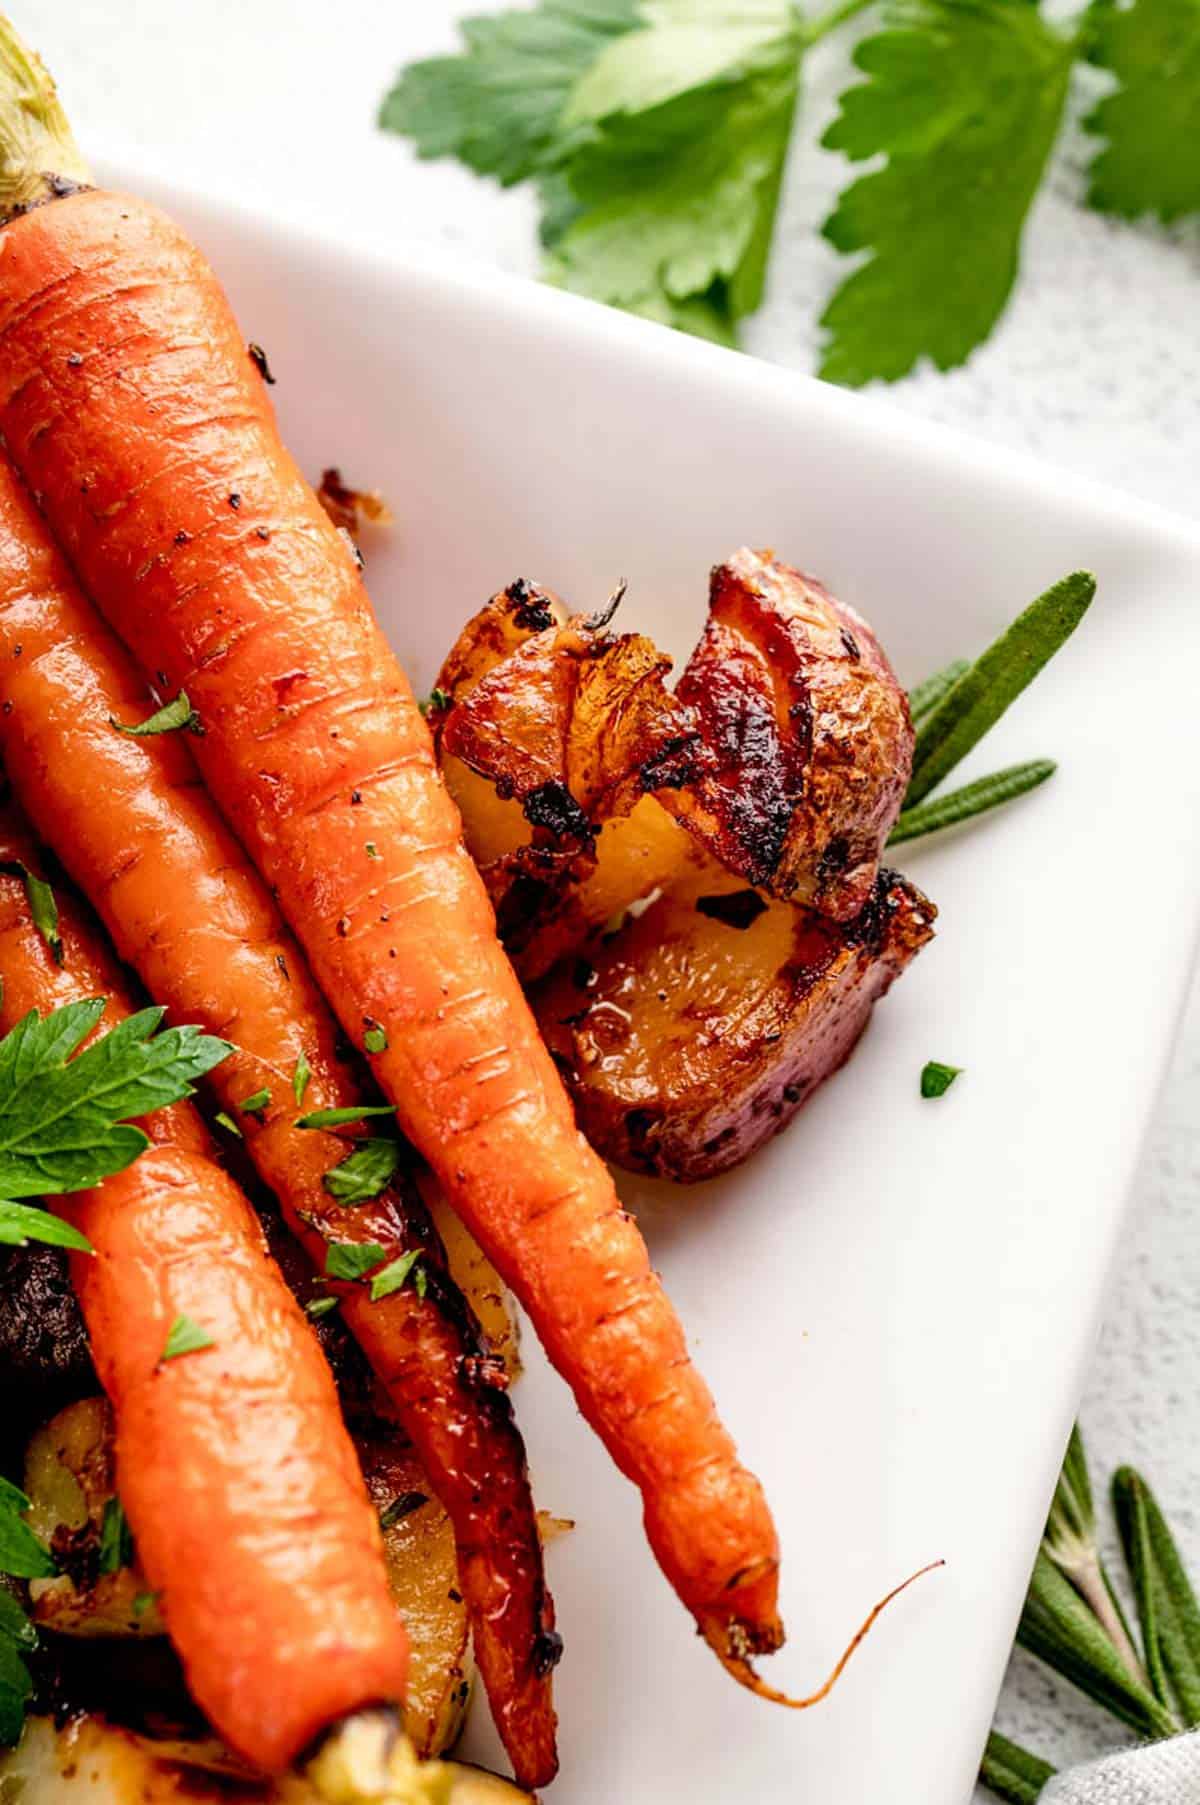 A close up of roasted carrots and potatoes.